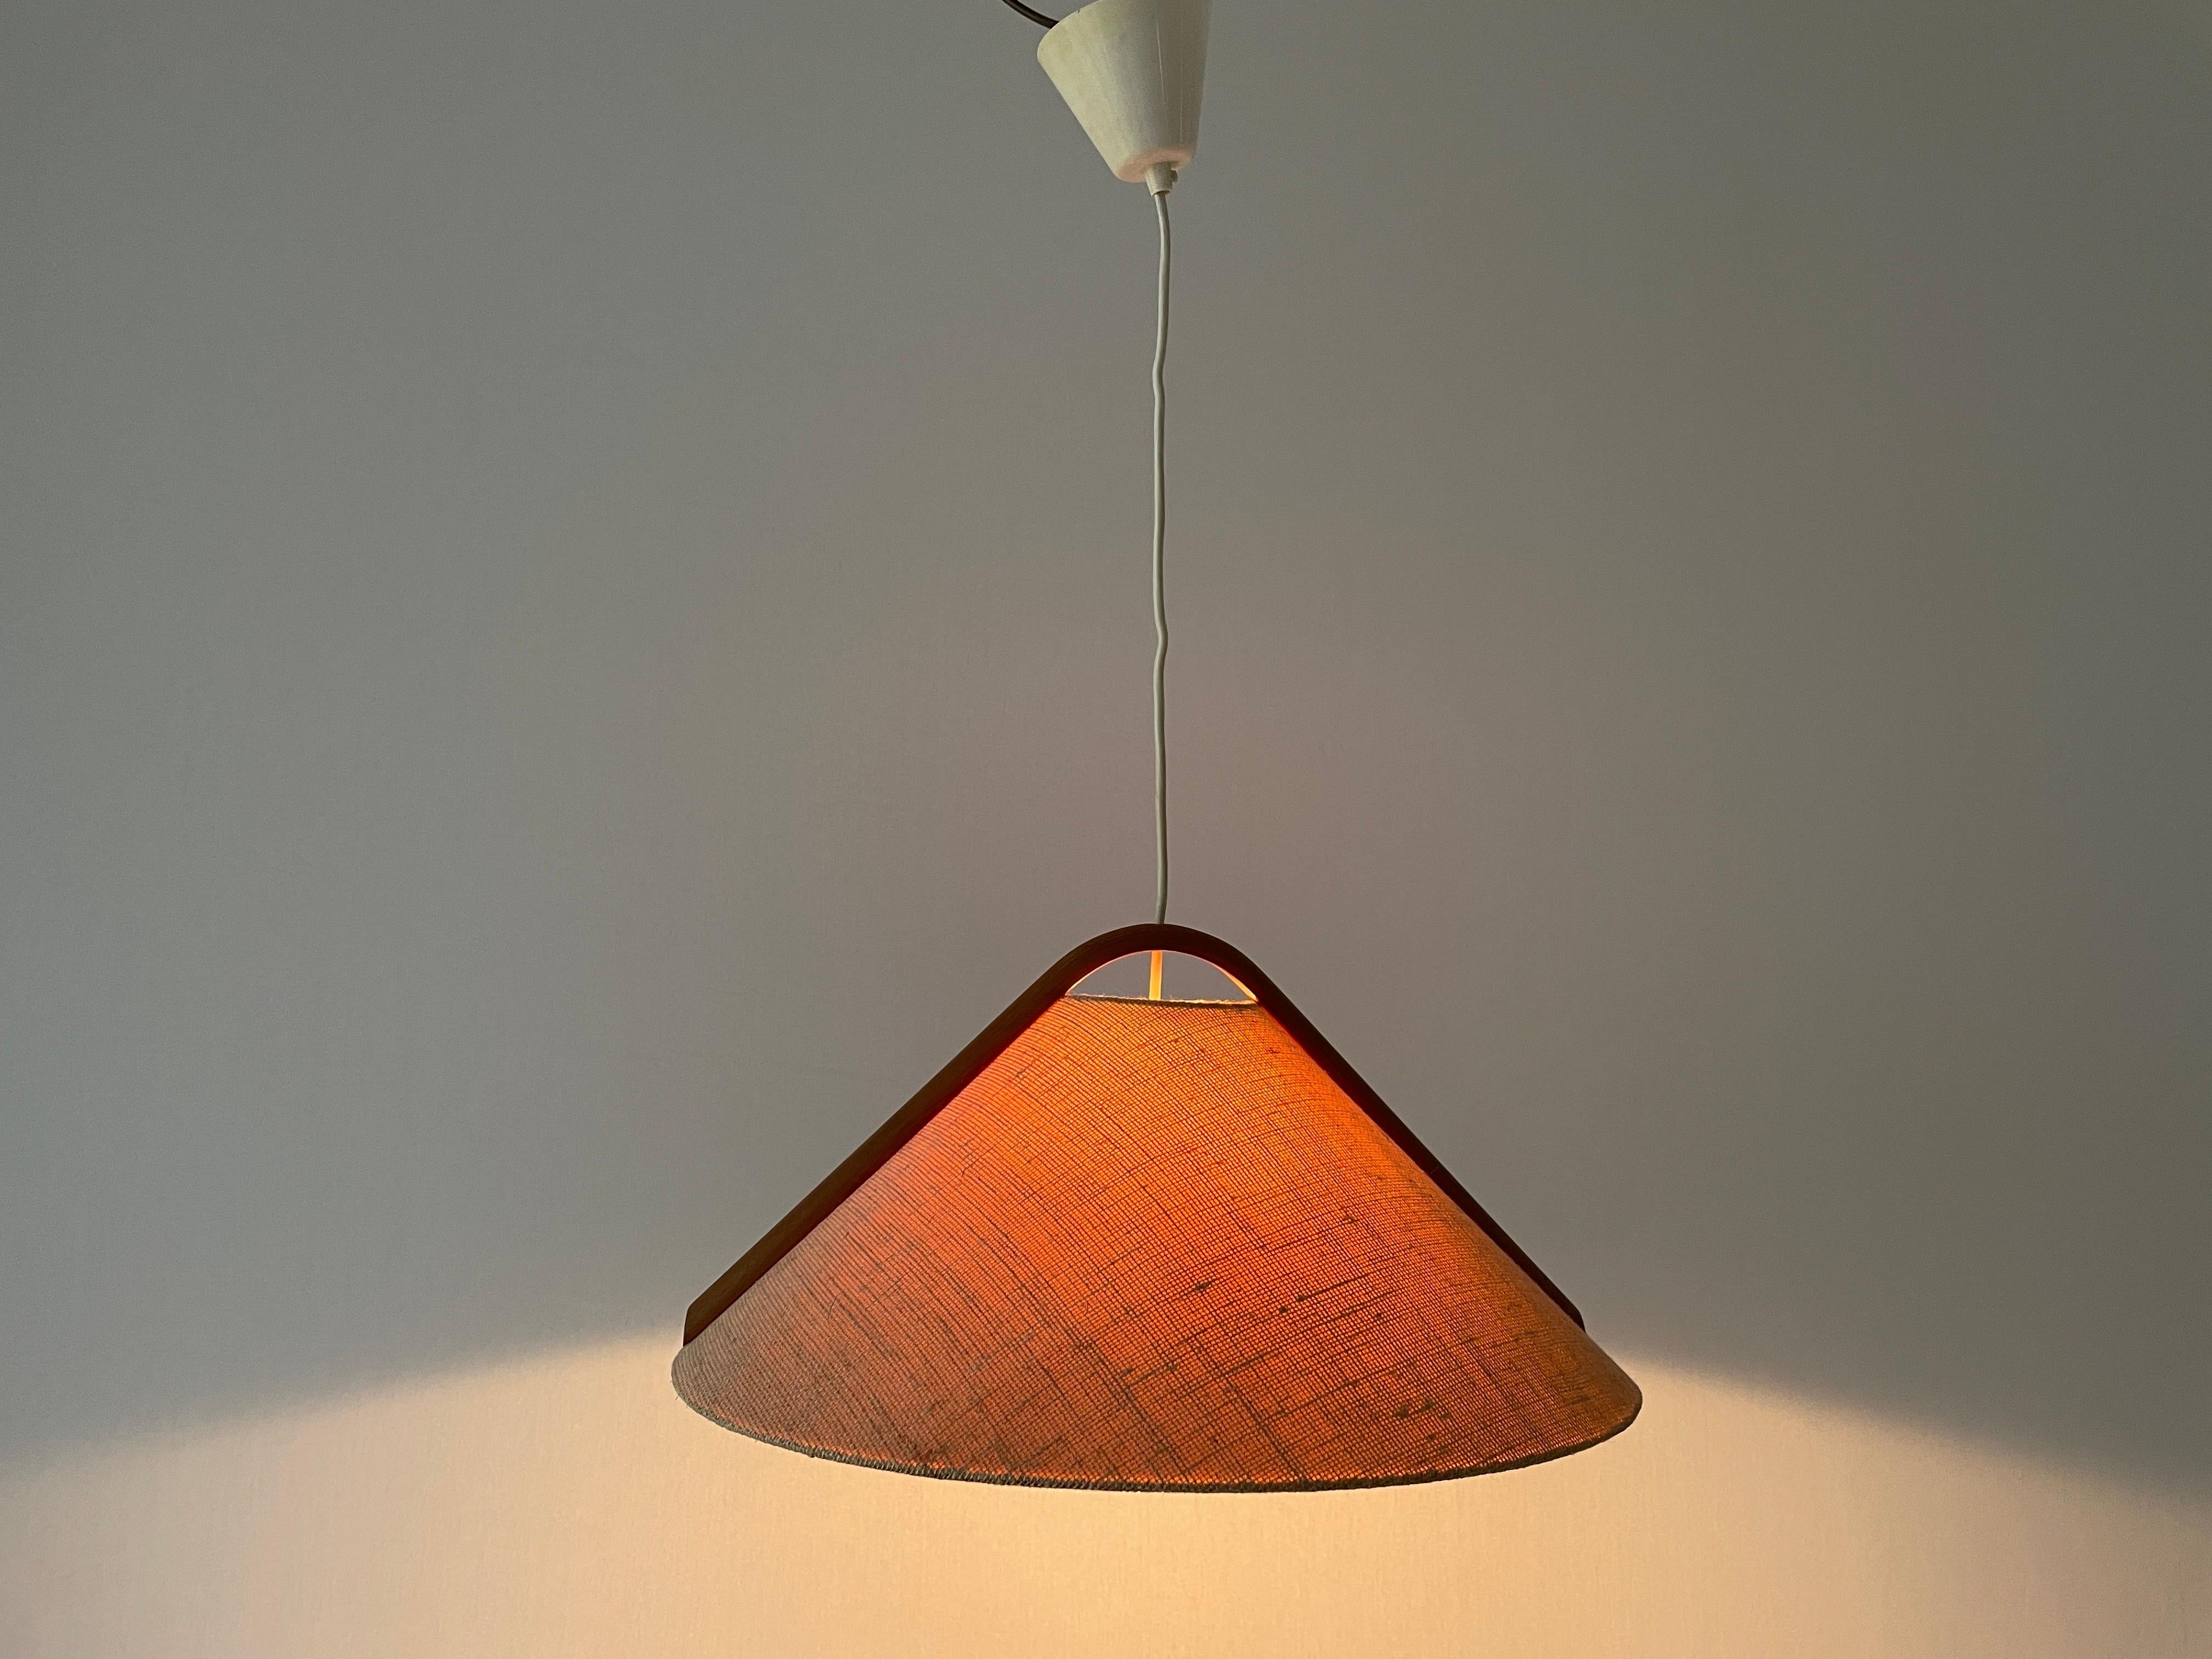 Conic Design Fabric Pendant Lamp with Teak Detail, 1960s, Germany For Sale 8